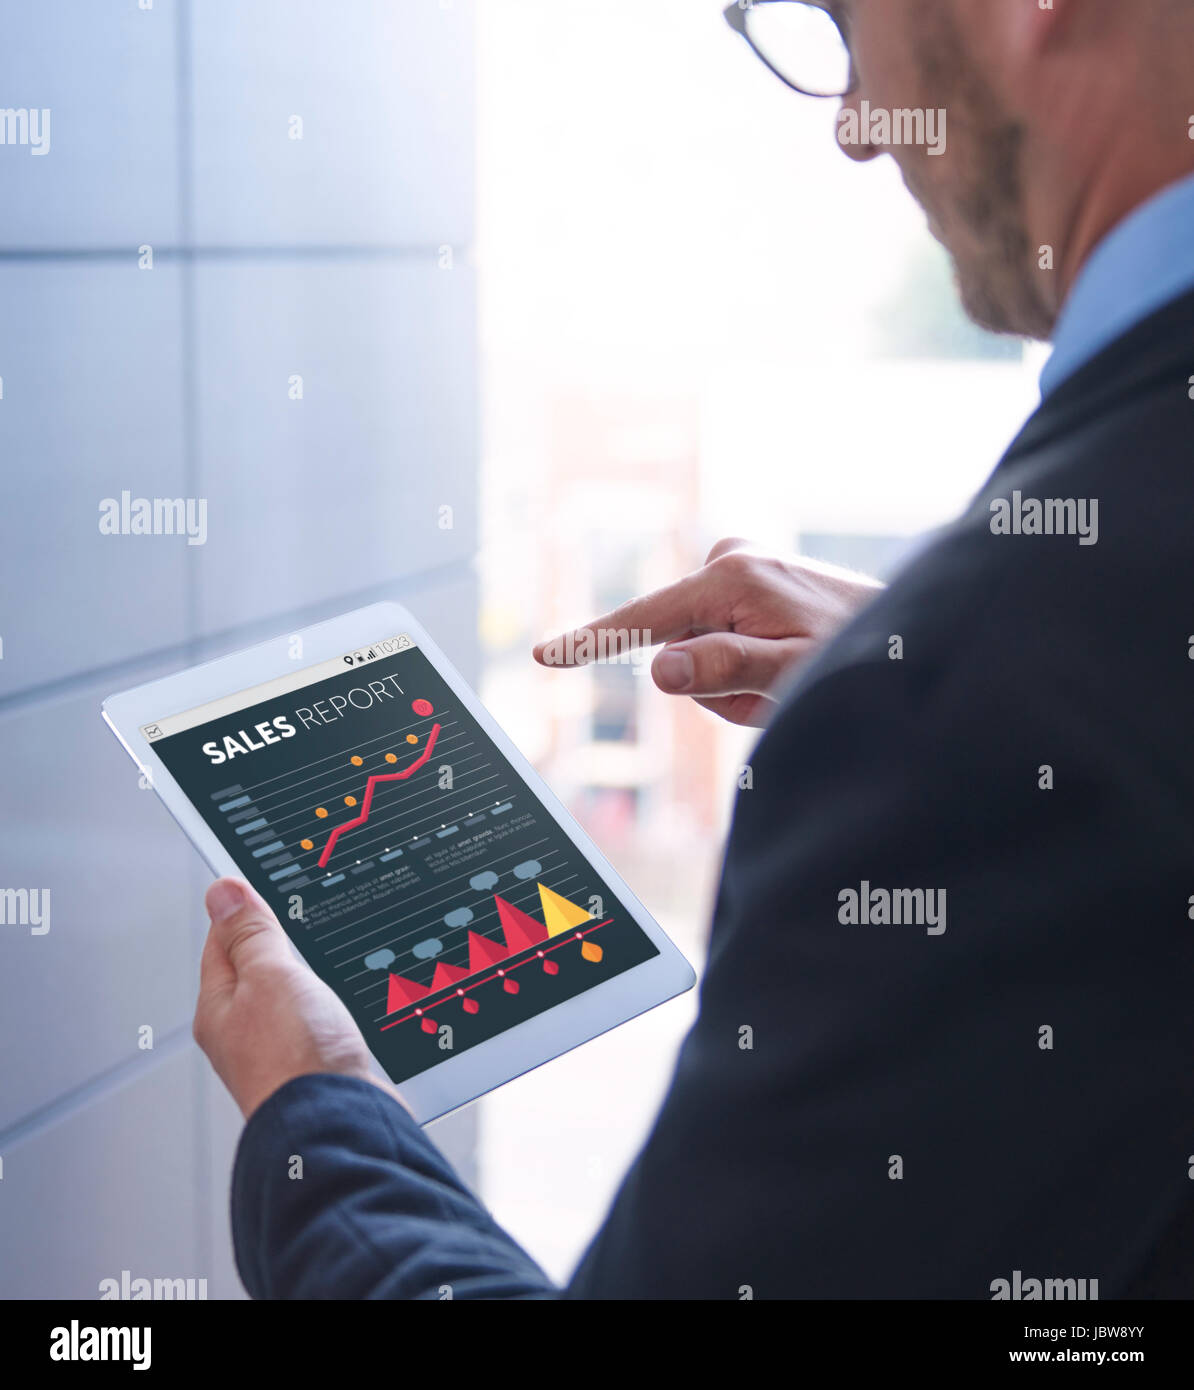 Man in suit using digital tablet Stock Photo